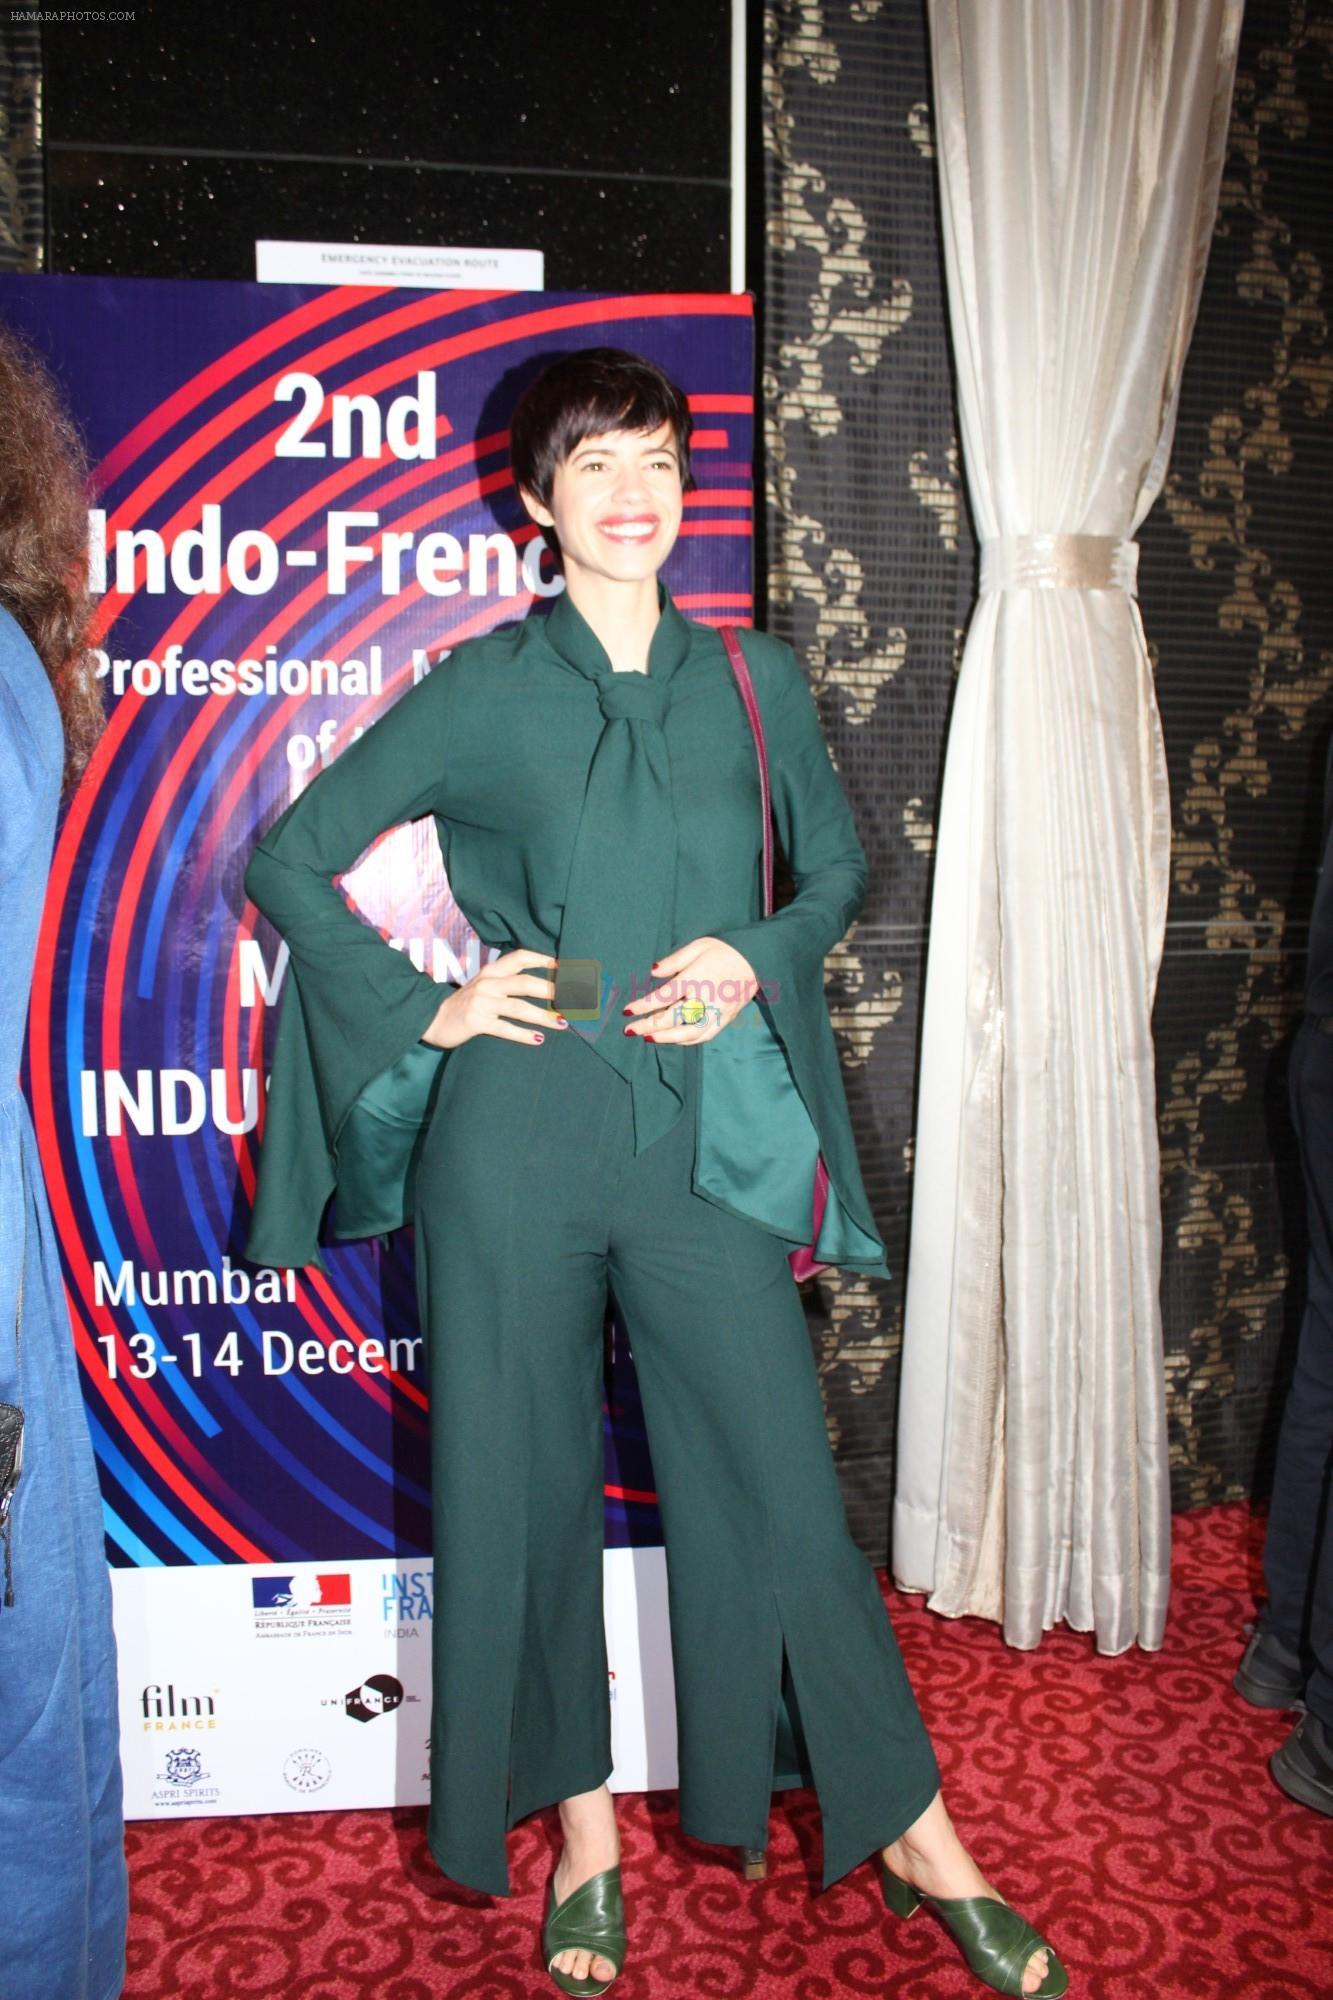 Kalki Koechlin at 2nd Indo-French Meeting Wherin film Industry Culture Exchange Between India on 15th Dec 2018